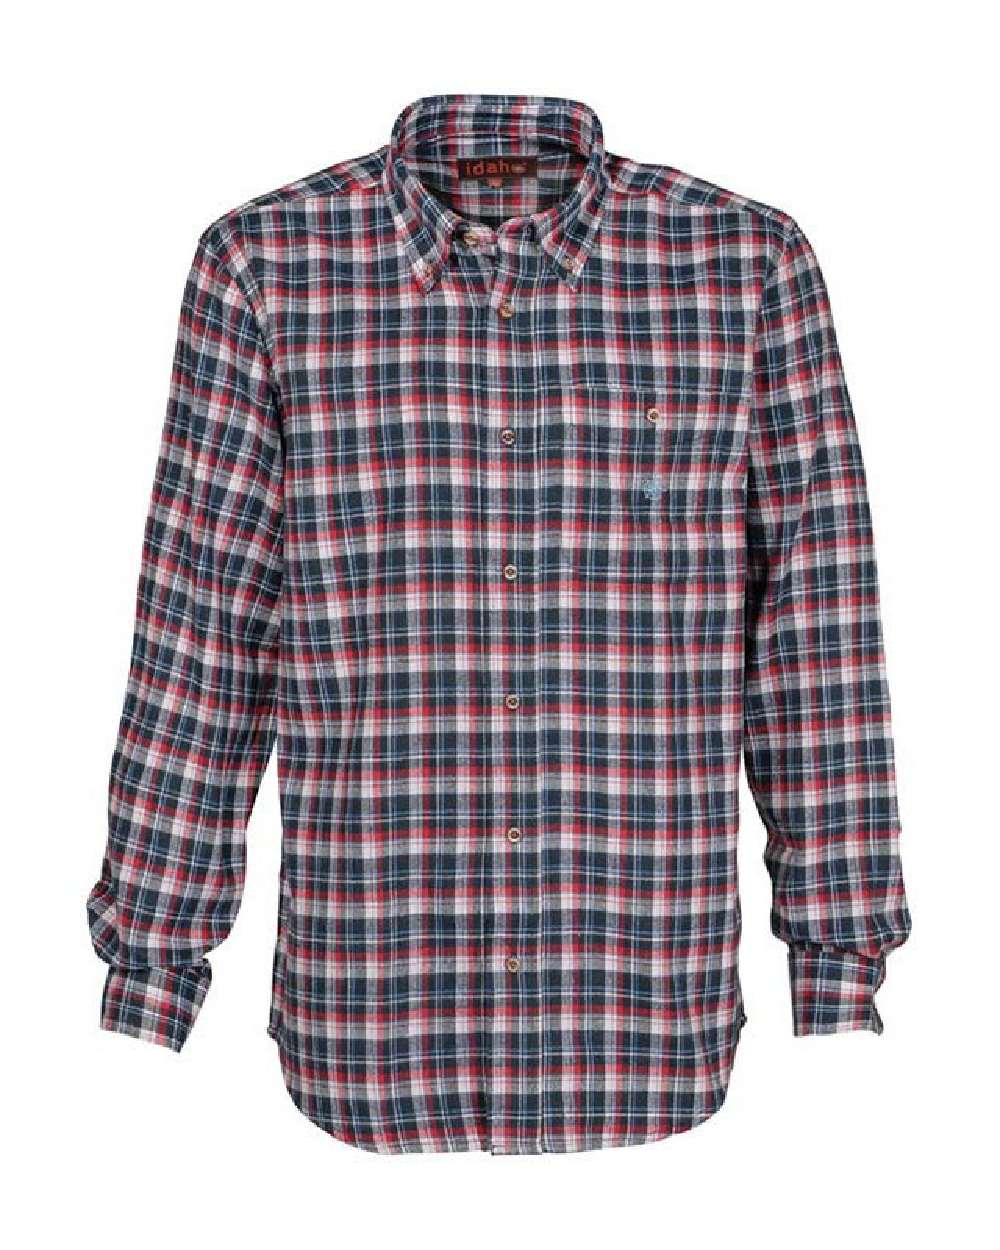 Percussion Castor Shirt in Red 